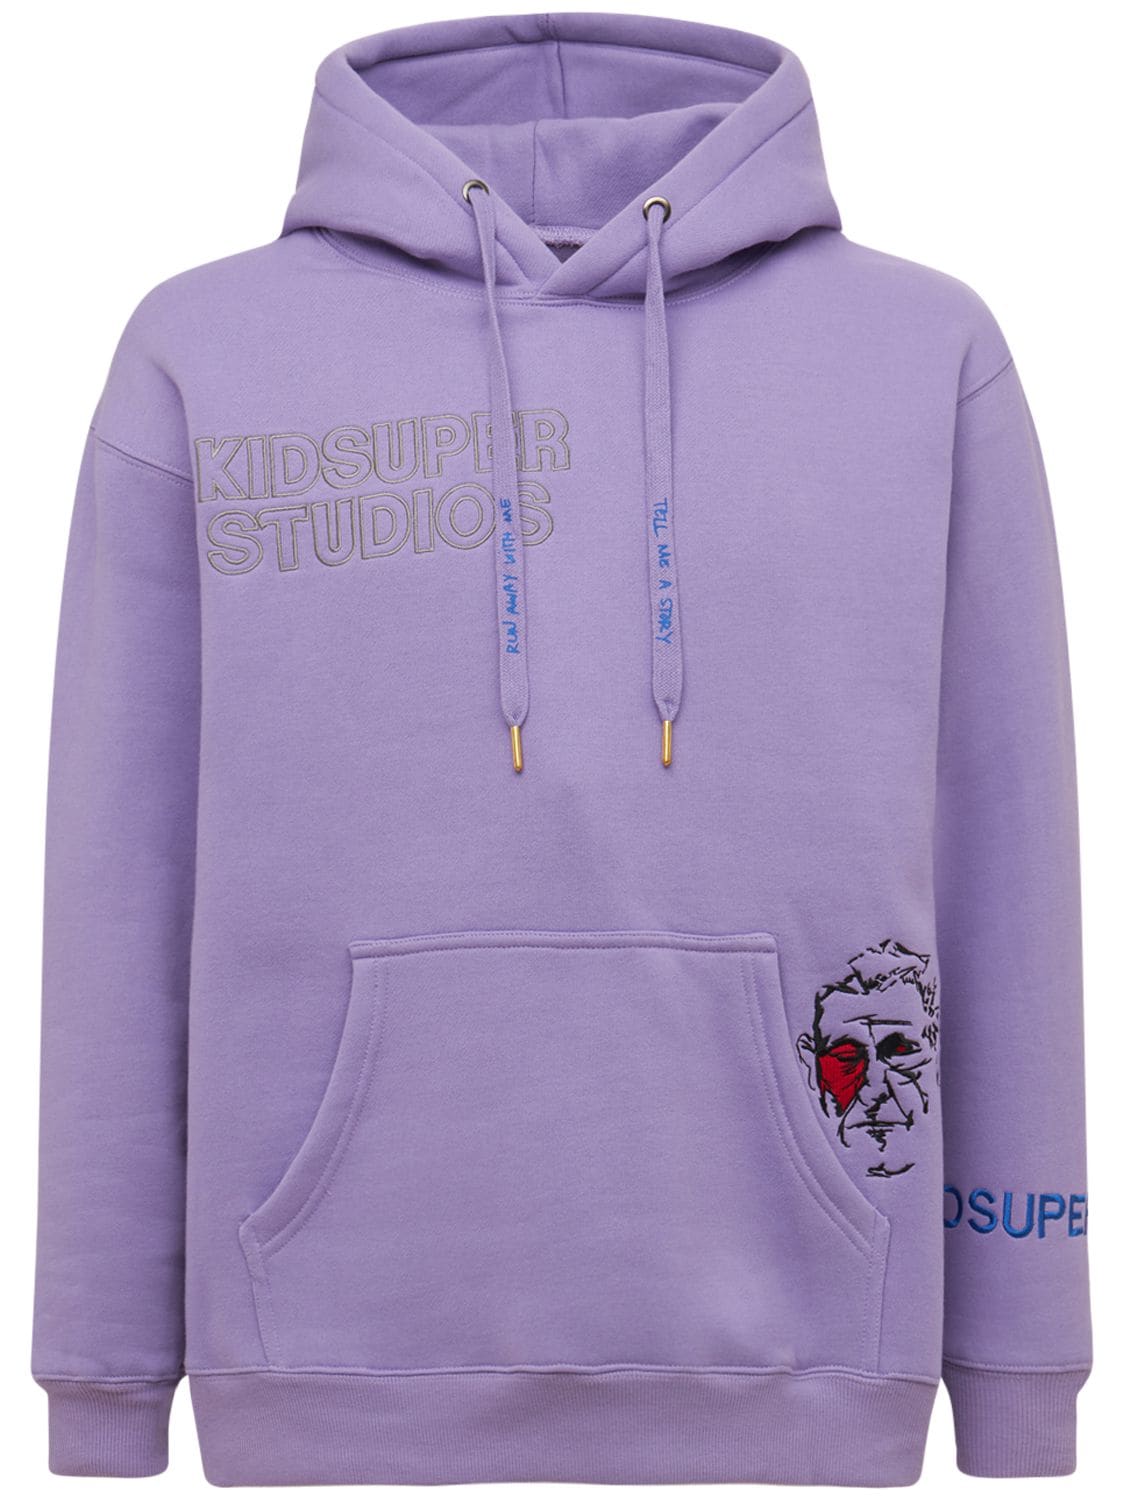 Kidsuper Studios Embroidered Cotton Hoodie In Lila | ModeSens